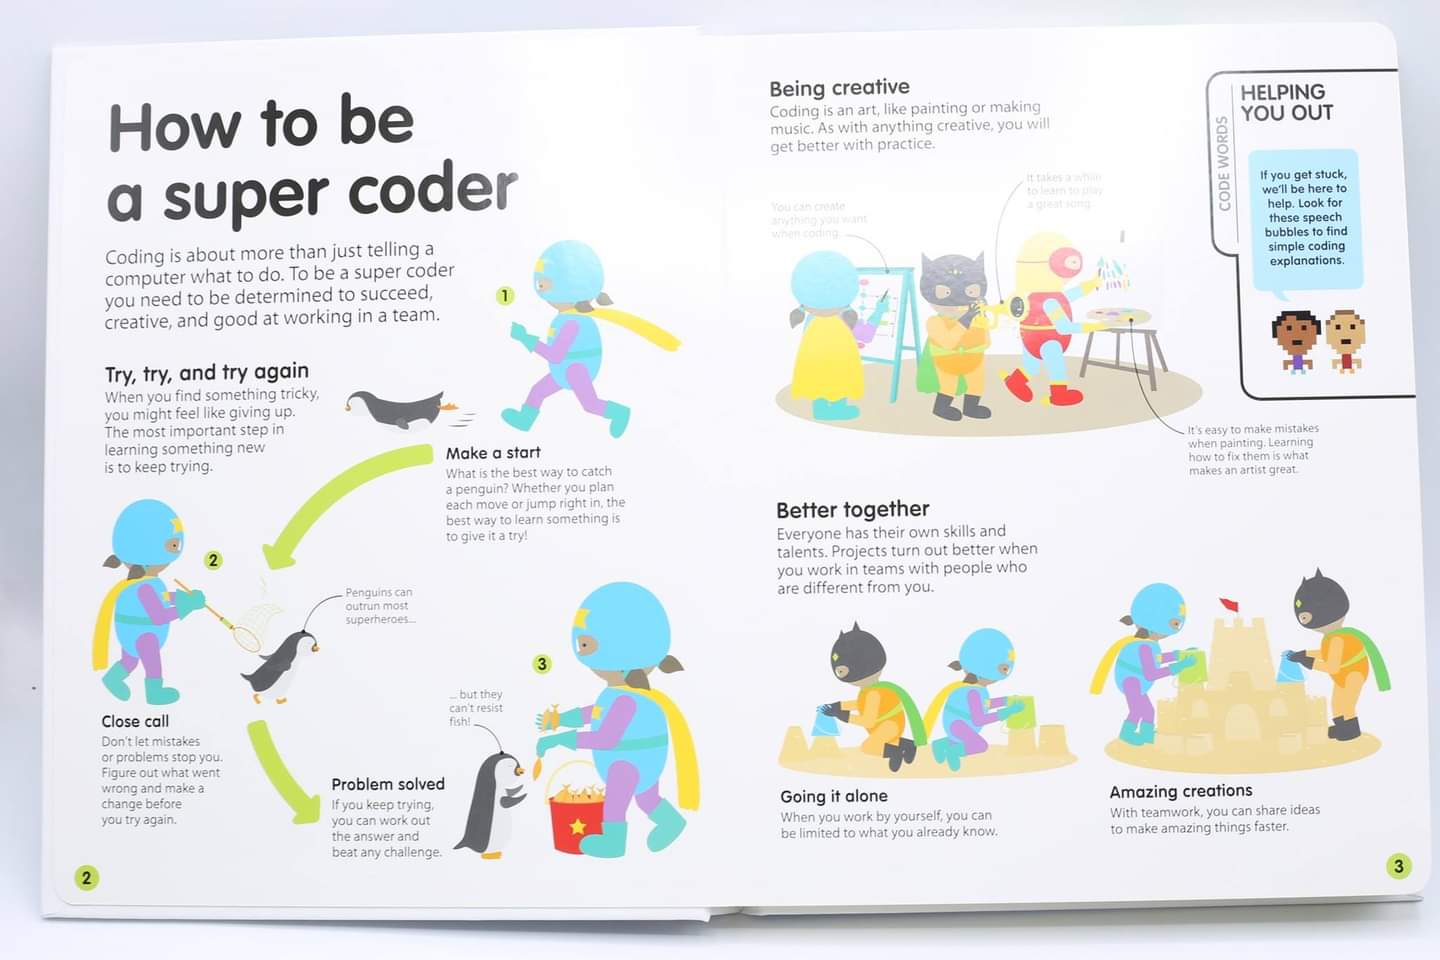 My First Coding Book: Packed with Flaps and Lots More to Help you Code without a Computer!